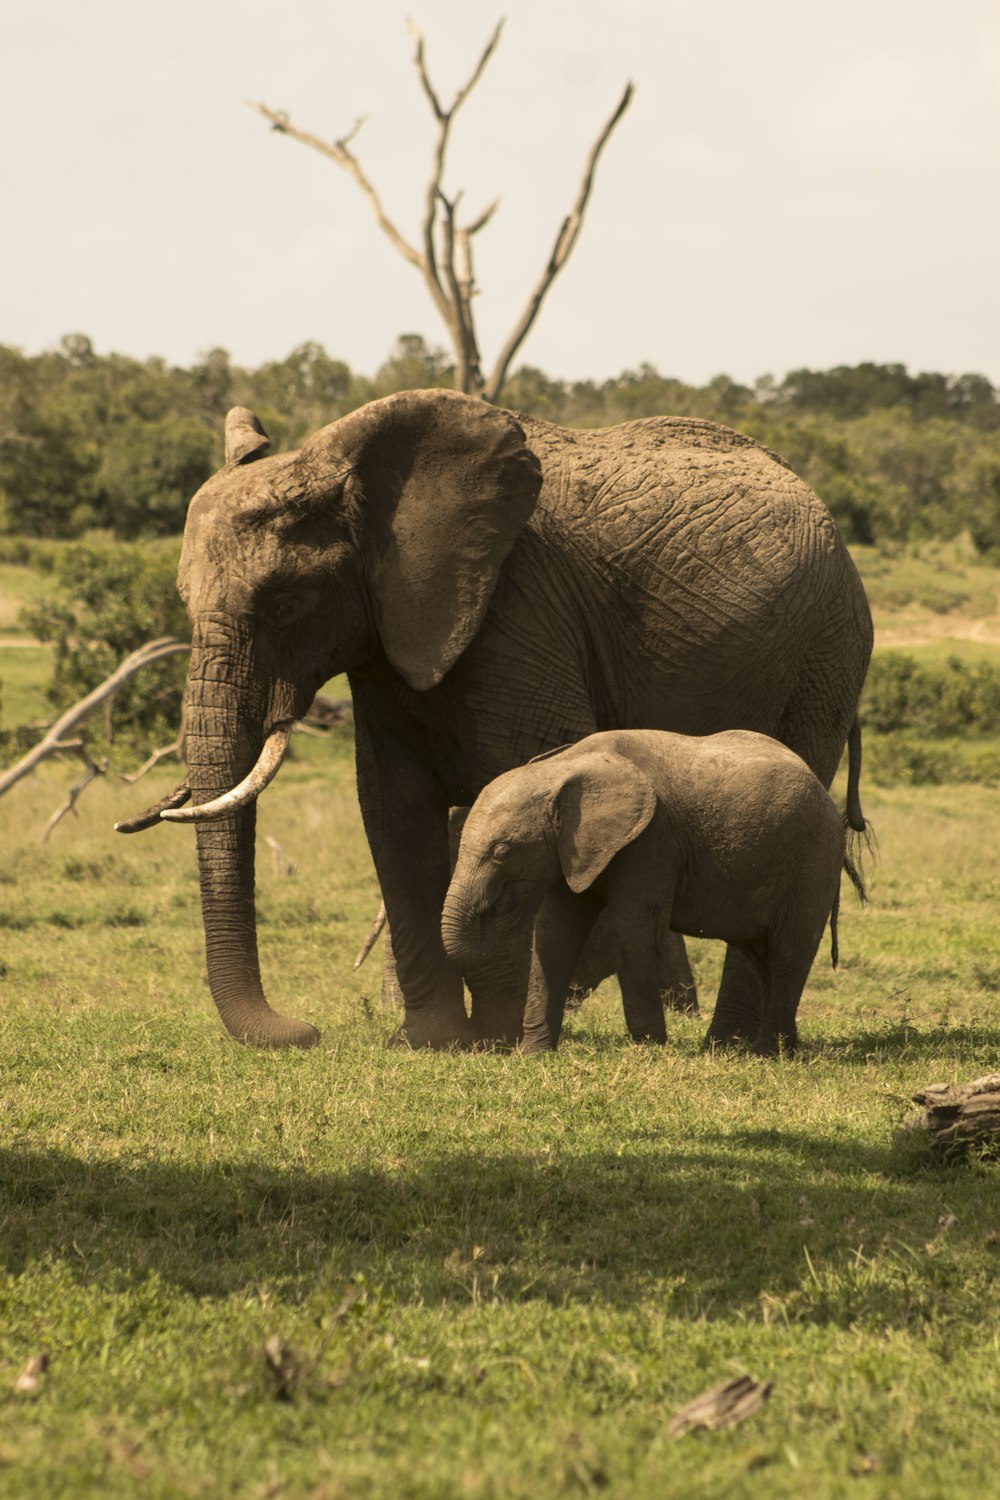 an adult elephant and a baby elephant standing in a field